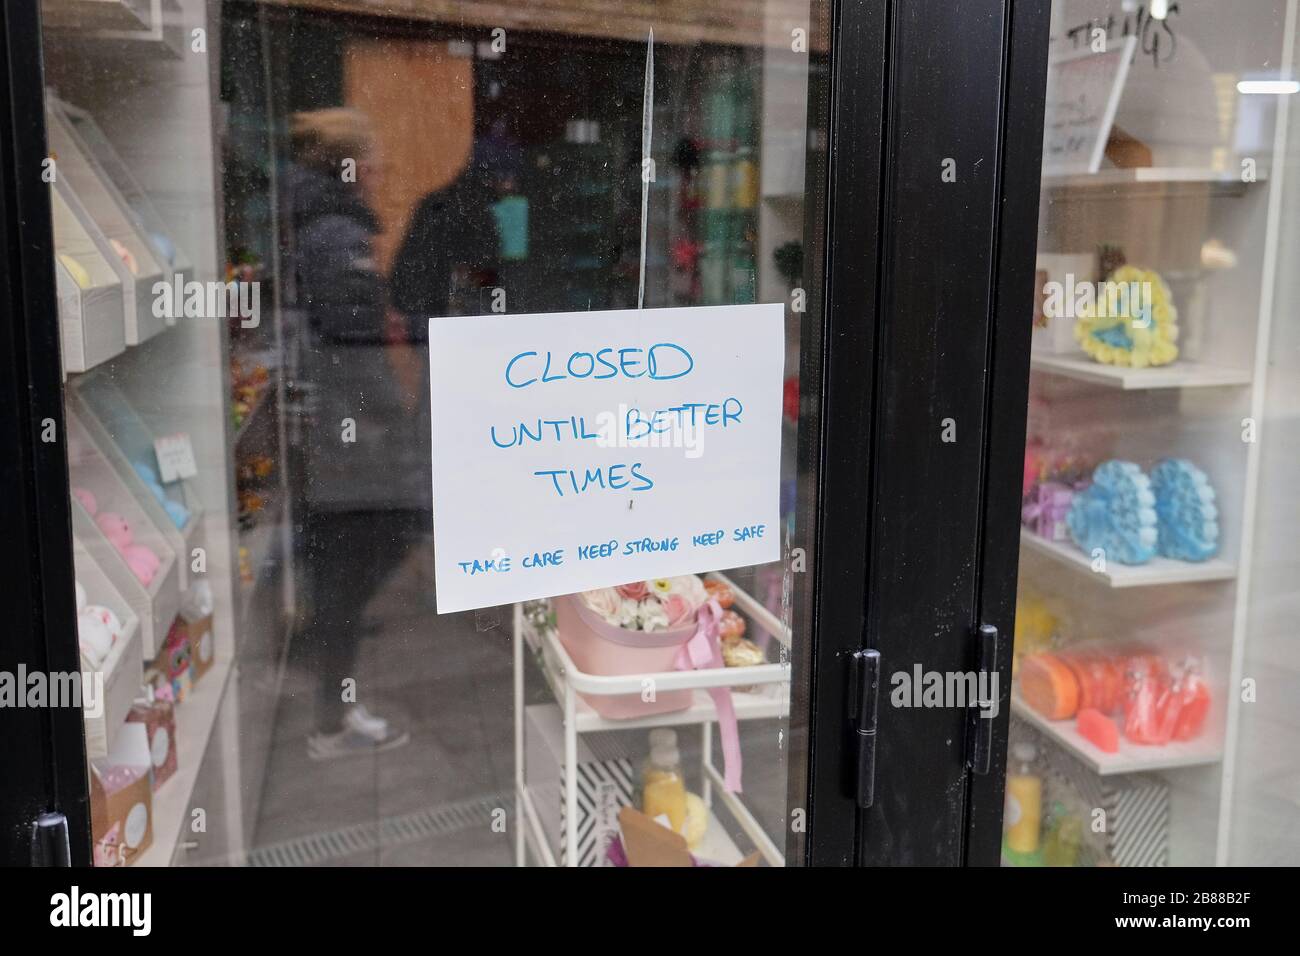 Camden Market, London, England - March 20, 2020: Closed until better times - a shop in Camden Market closes because of Coronavirus Stock Photo